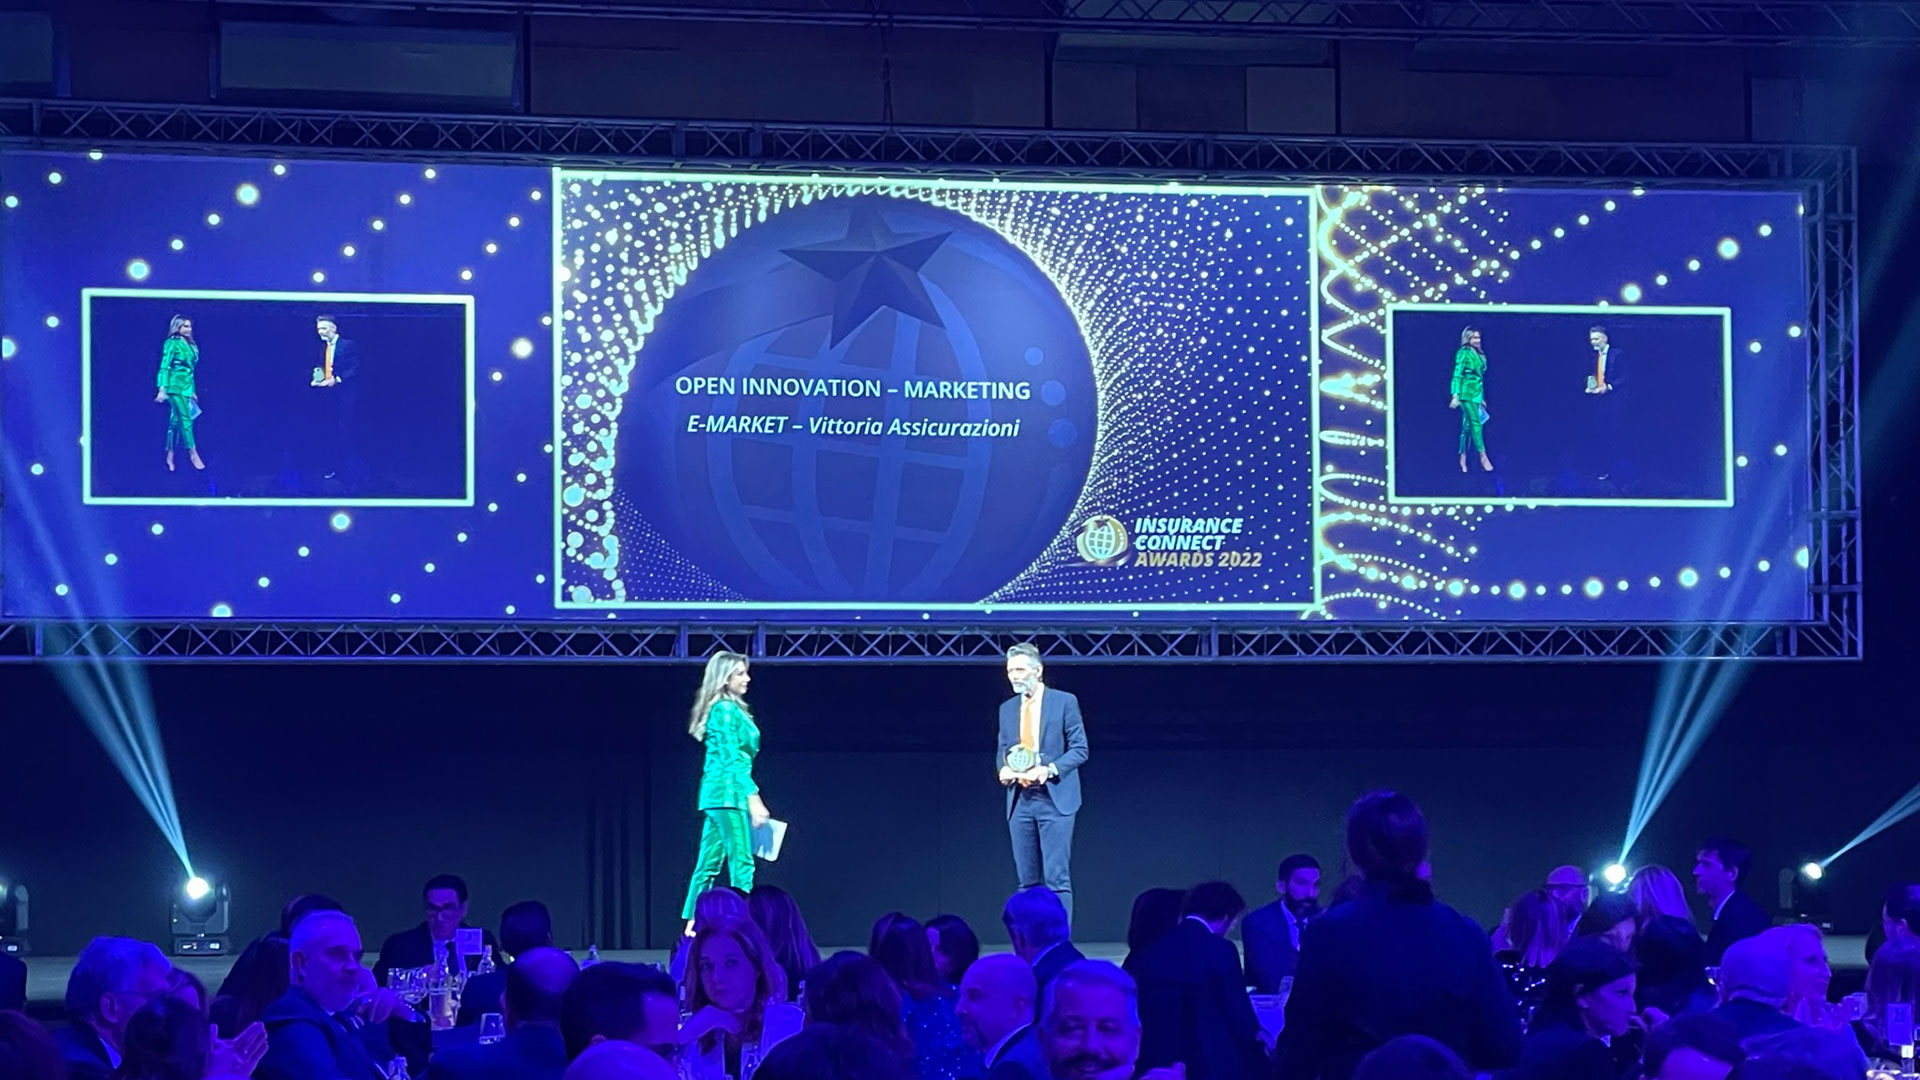 Insurance Connect Awards 2022 - 3